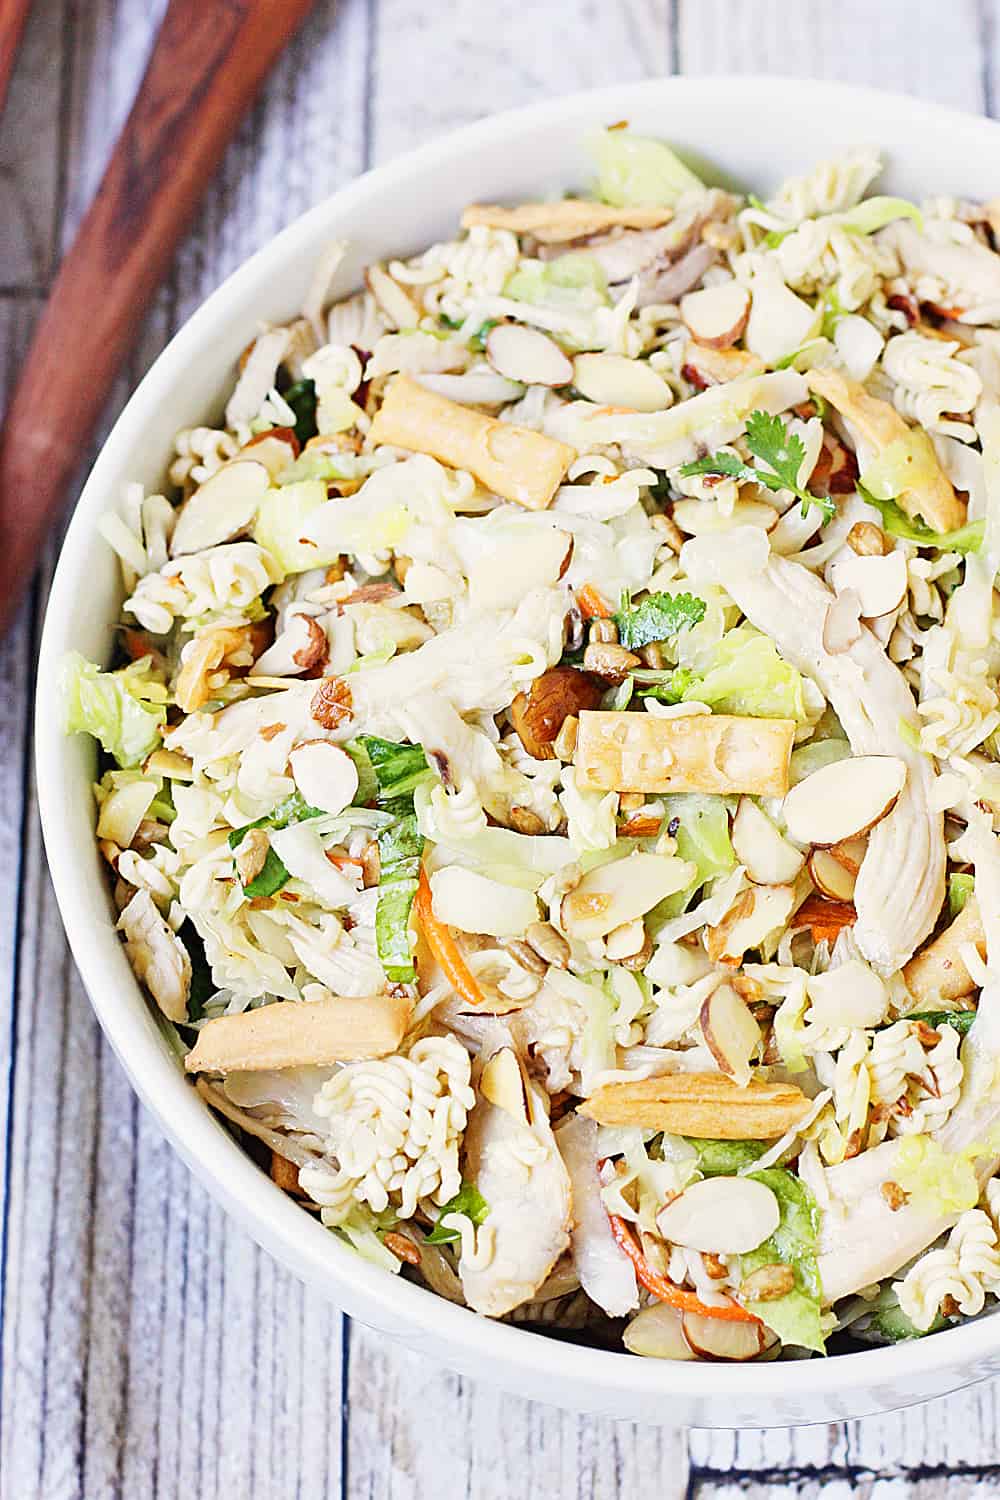 Easy Asian Ramen Salad -- My family LOVES this Asian ramen salad! An Asian salad kit + rotisserie chicken + a few simple ingredients equals the easiest Asian ramen noodle salad ever!